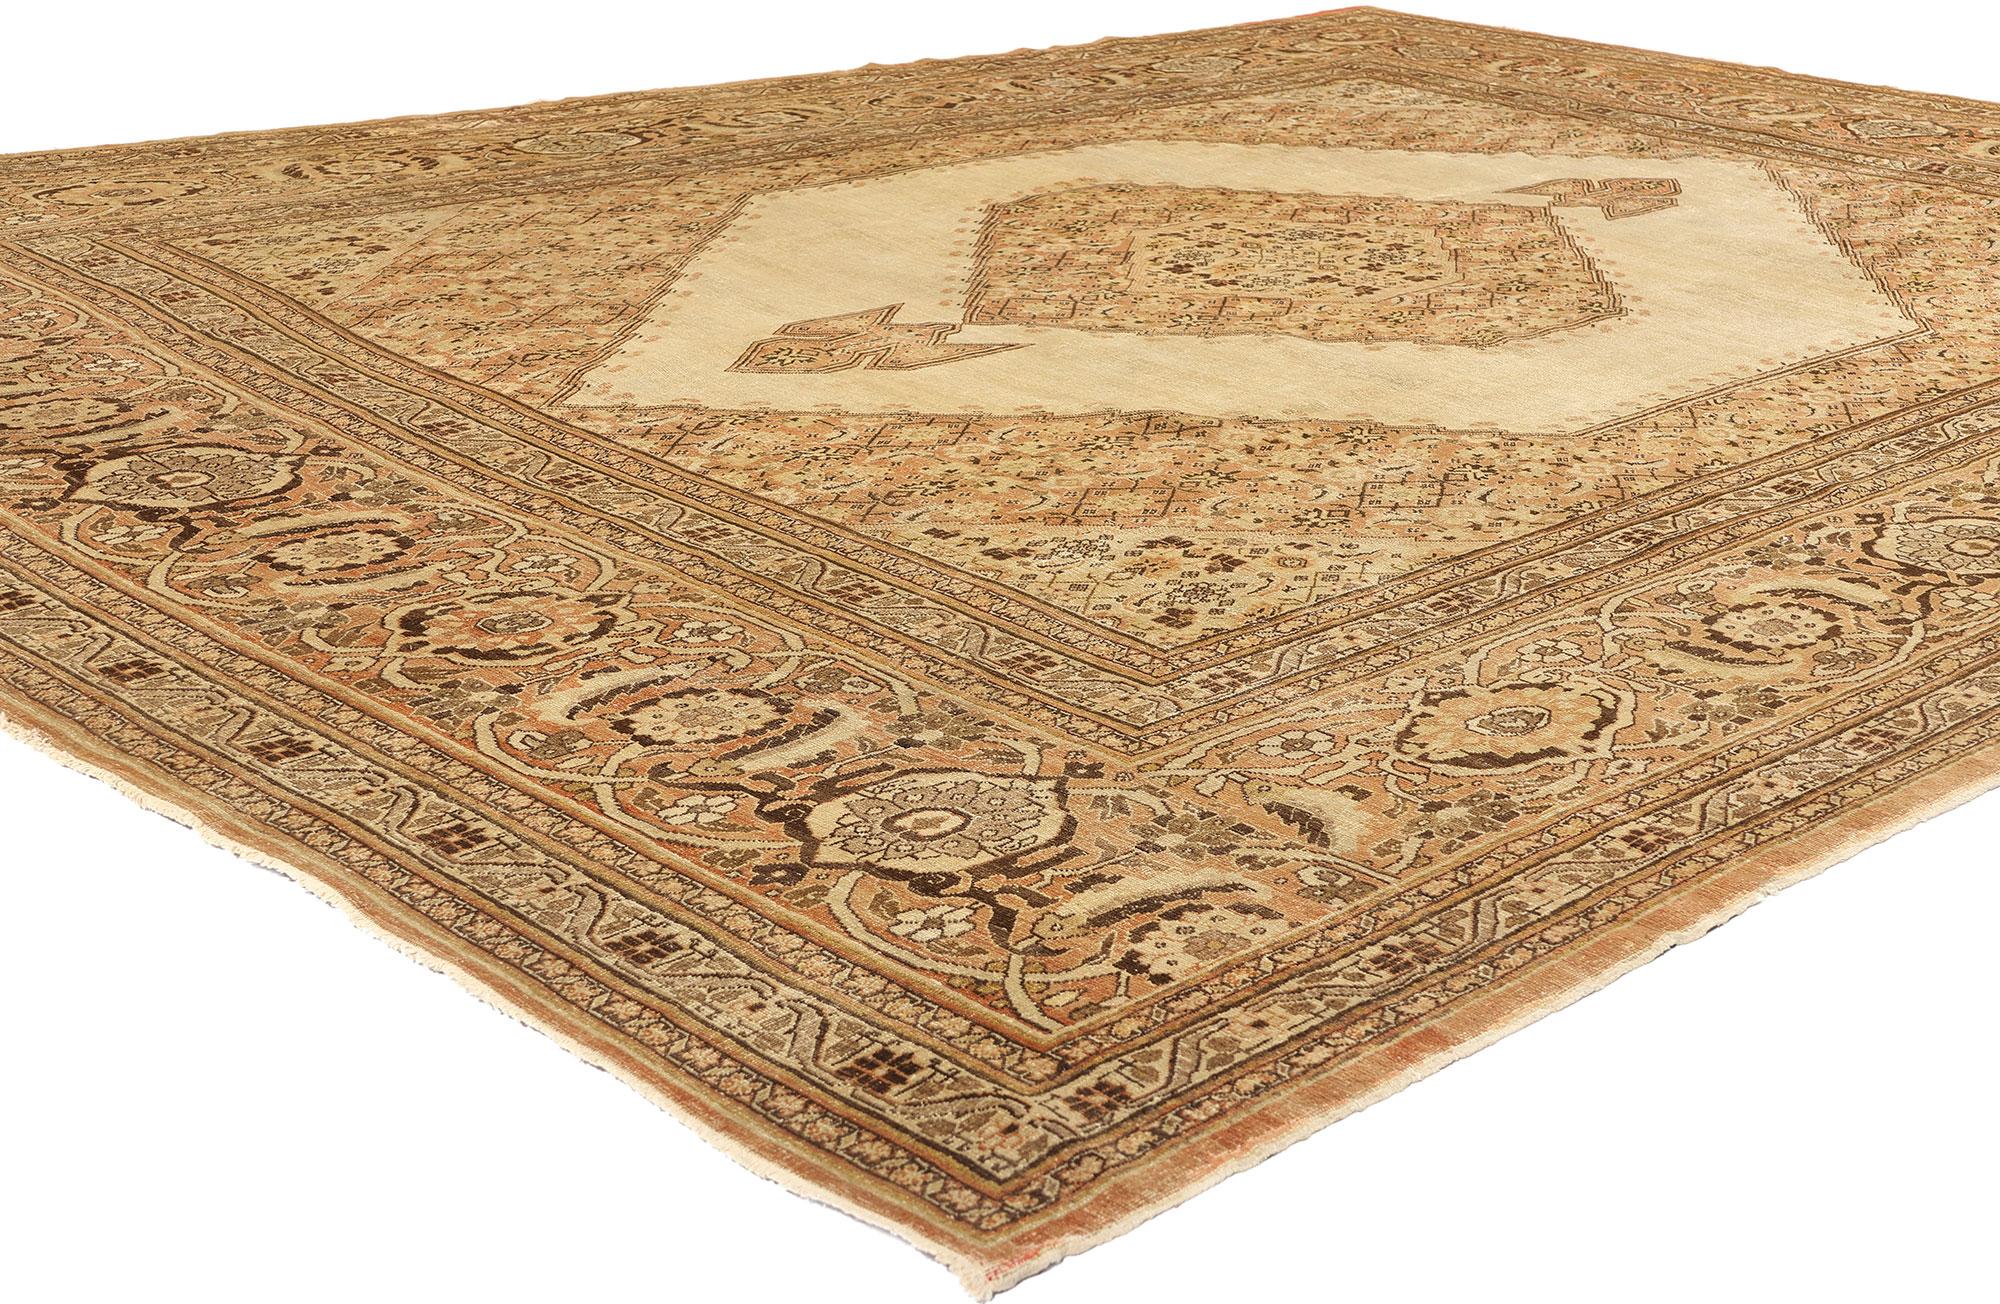 74938 Haji Khalili Antique Persian Tabriz Rug, 09'05 x 12'07. Haji Khalili Persian Tabriz rugs are renowned for their exceptional quality and intricate designs, originating from Tabriz, Iran, a historic hub of rug weaving. Crafted by skilled